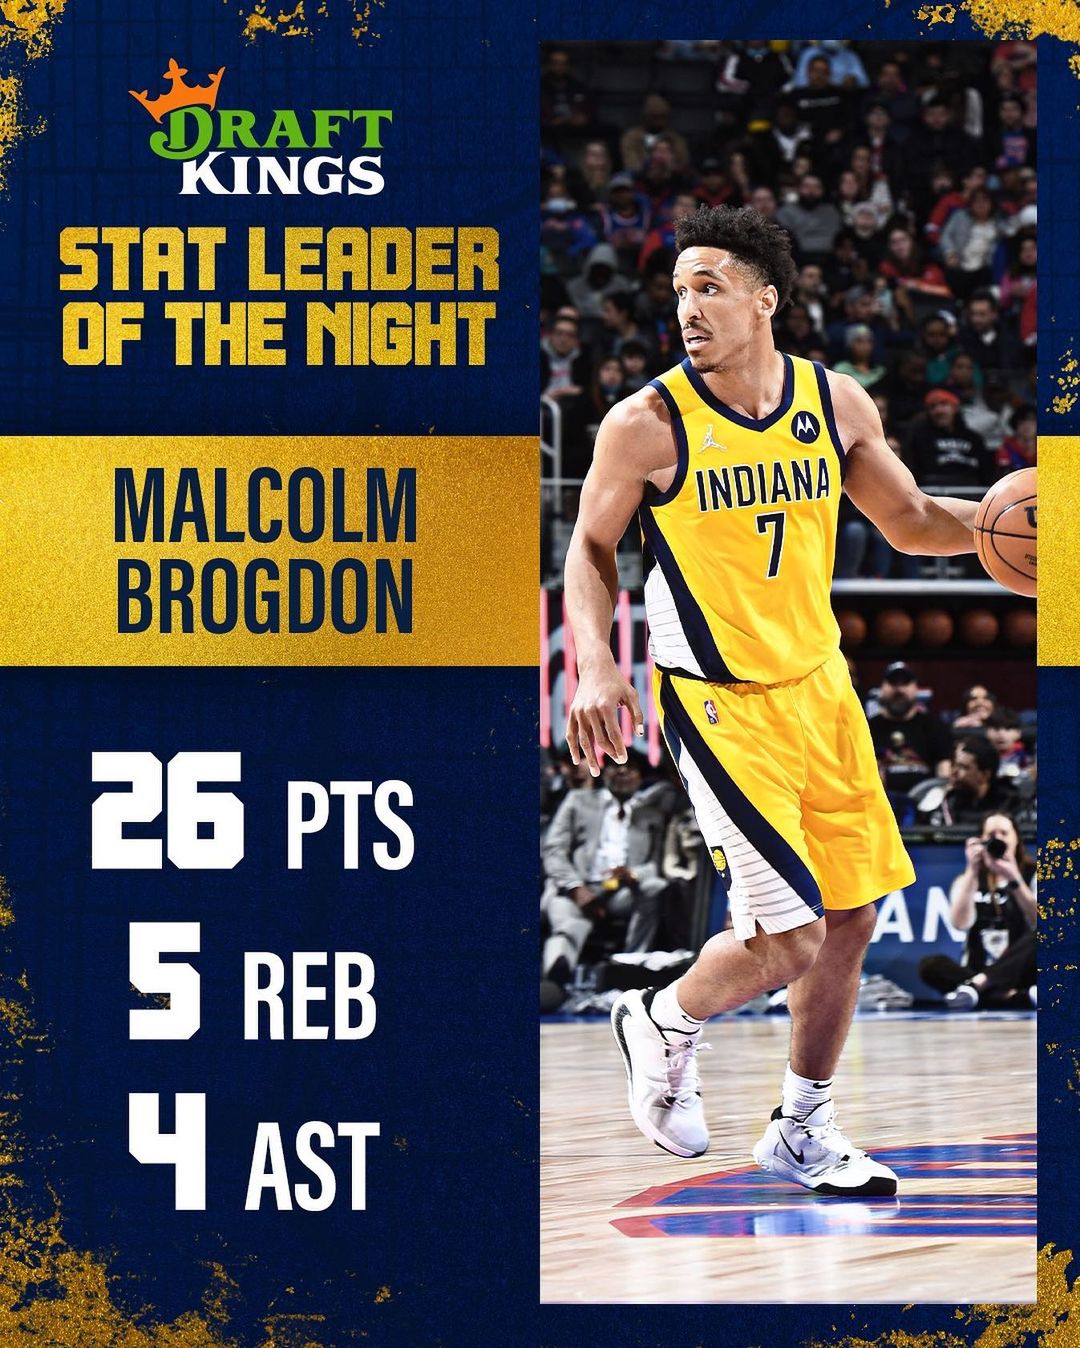 26-point night for Malcolm...